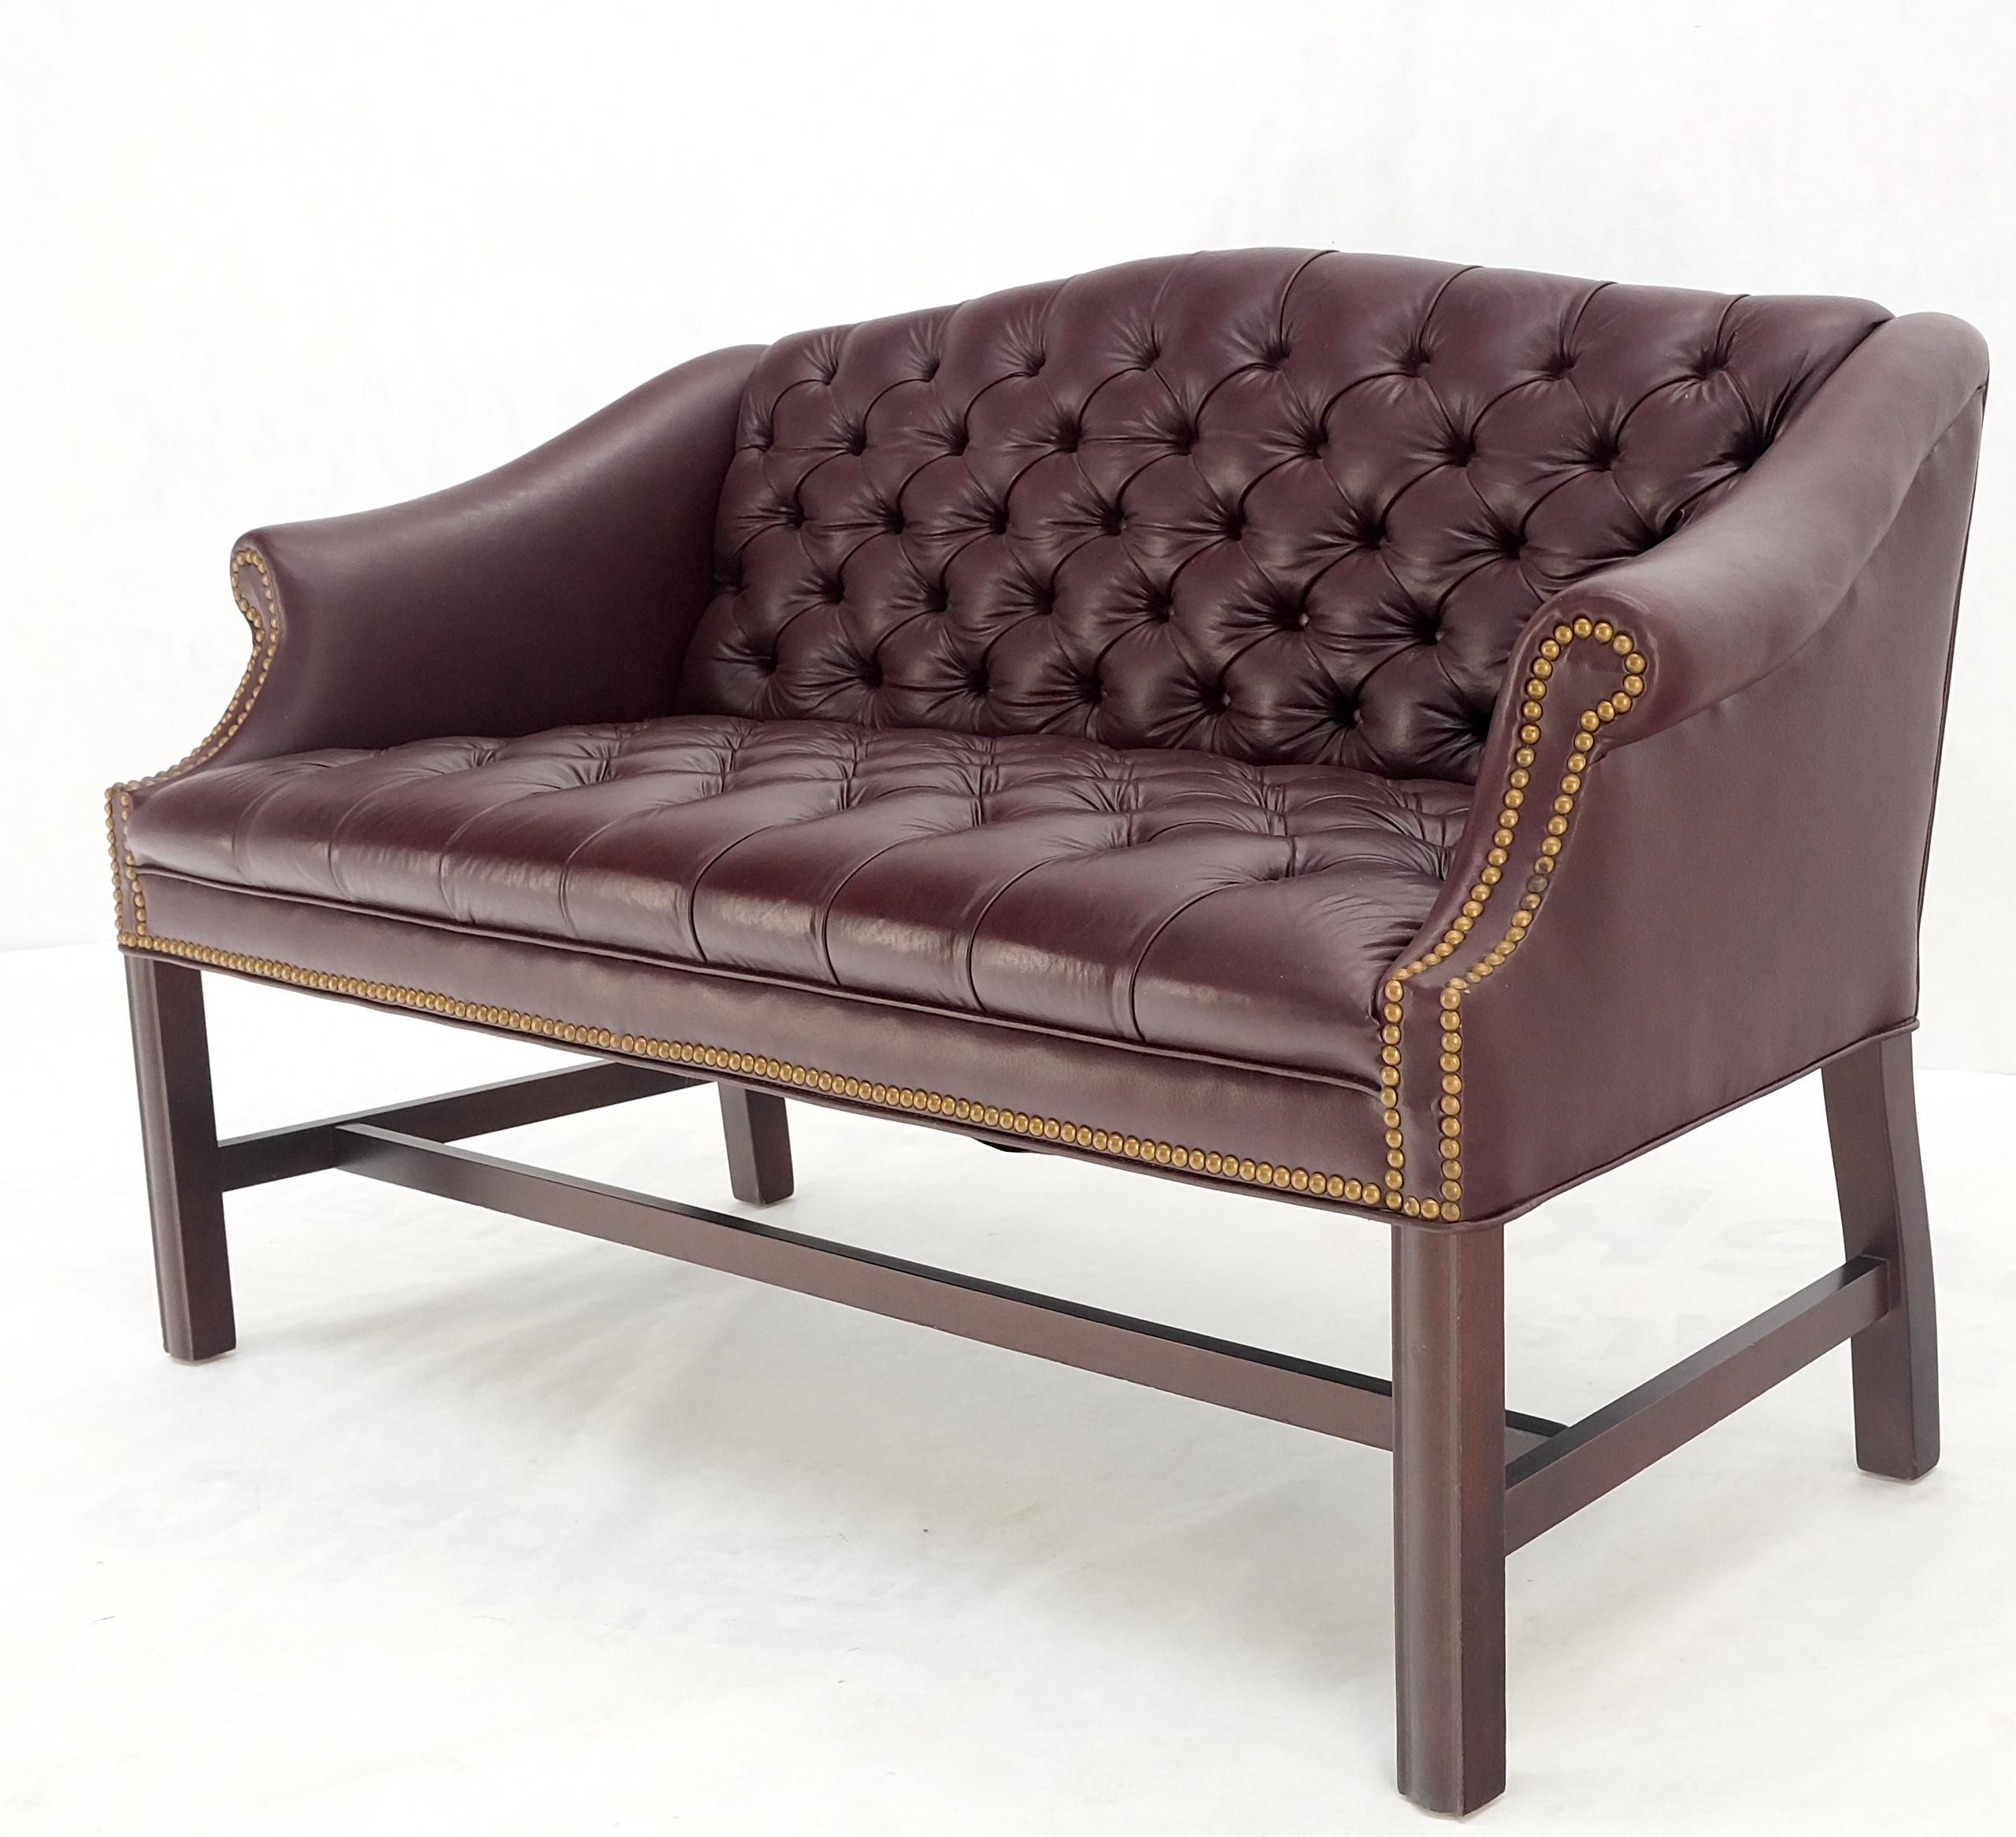 Tufted Burgundy Leather Federal Style Settee Love Seat Couch Sofa MINT! For Sale 7